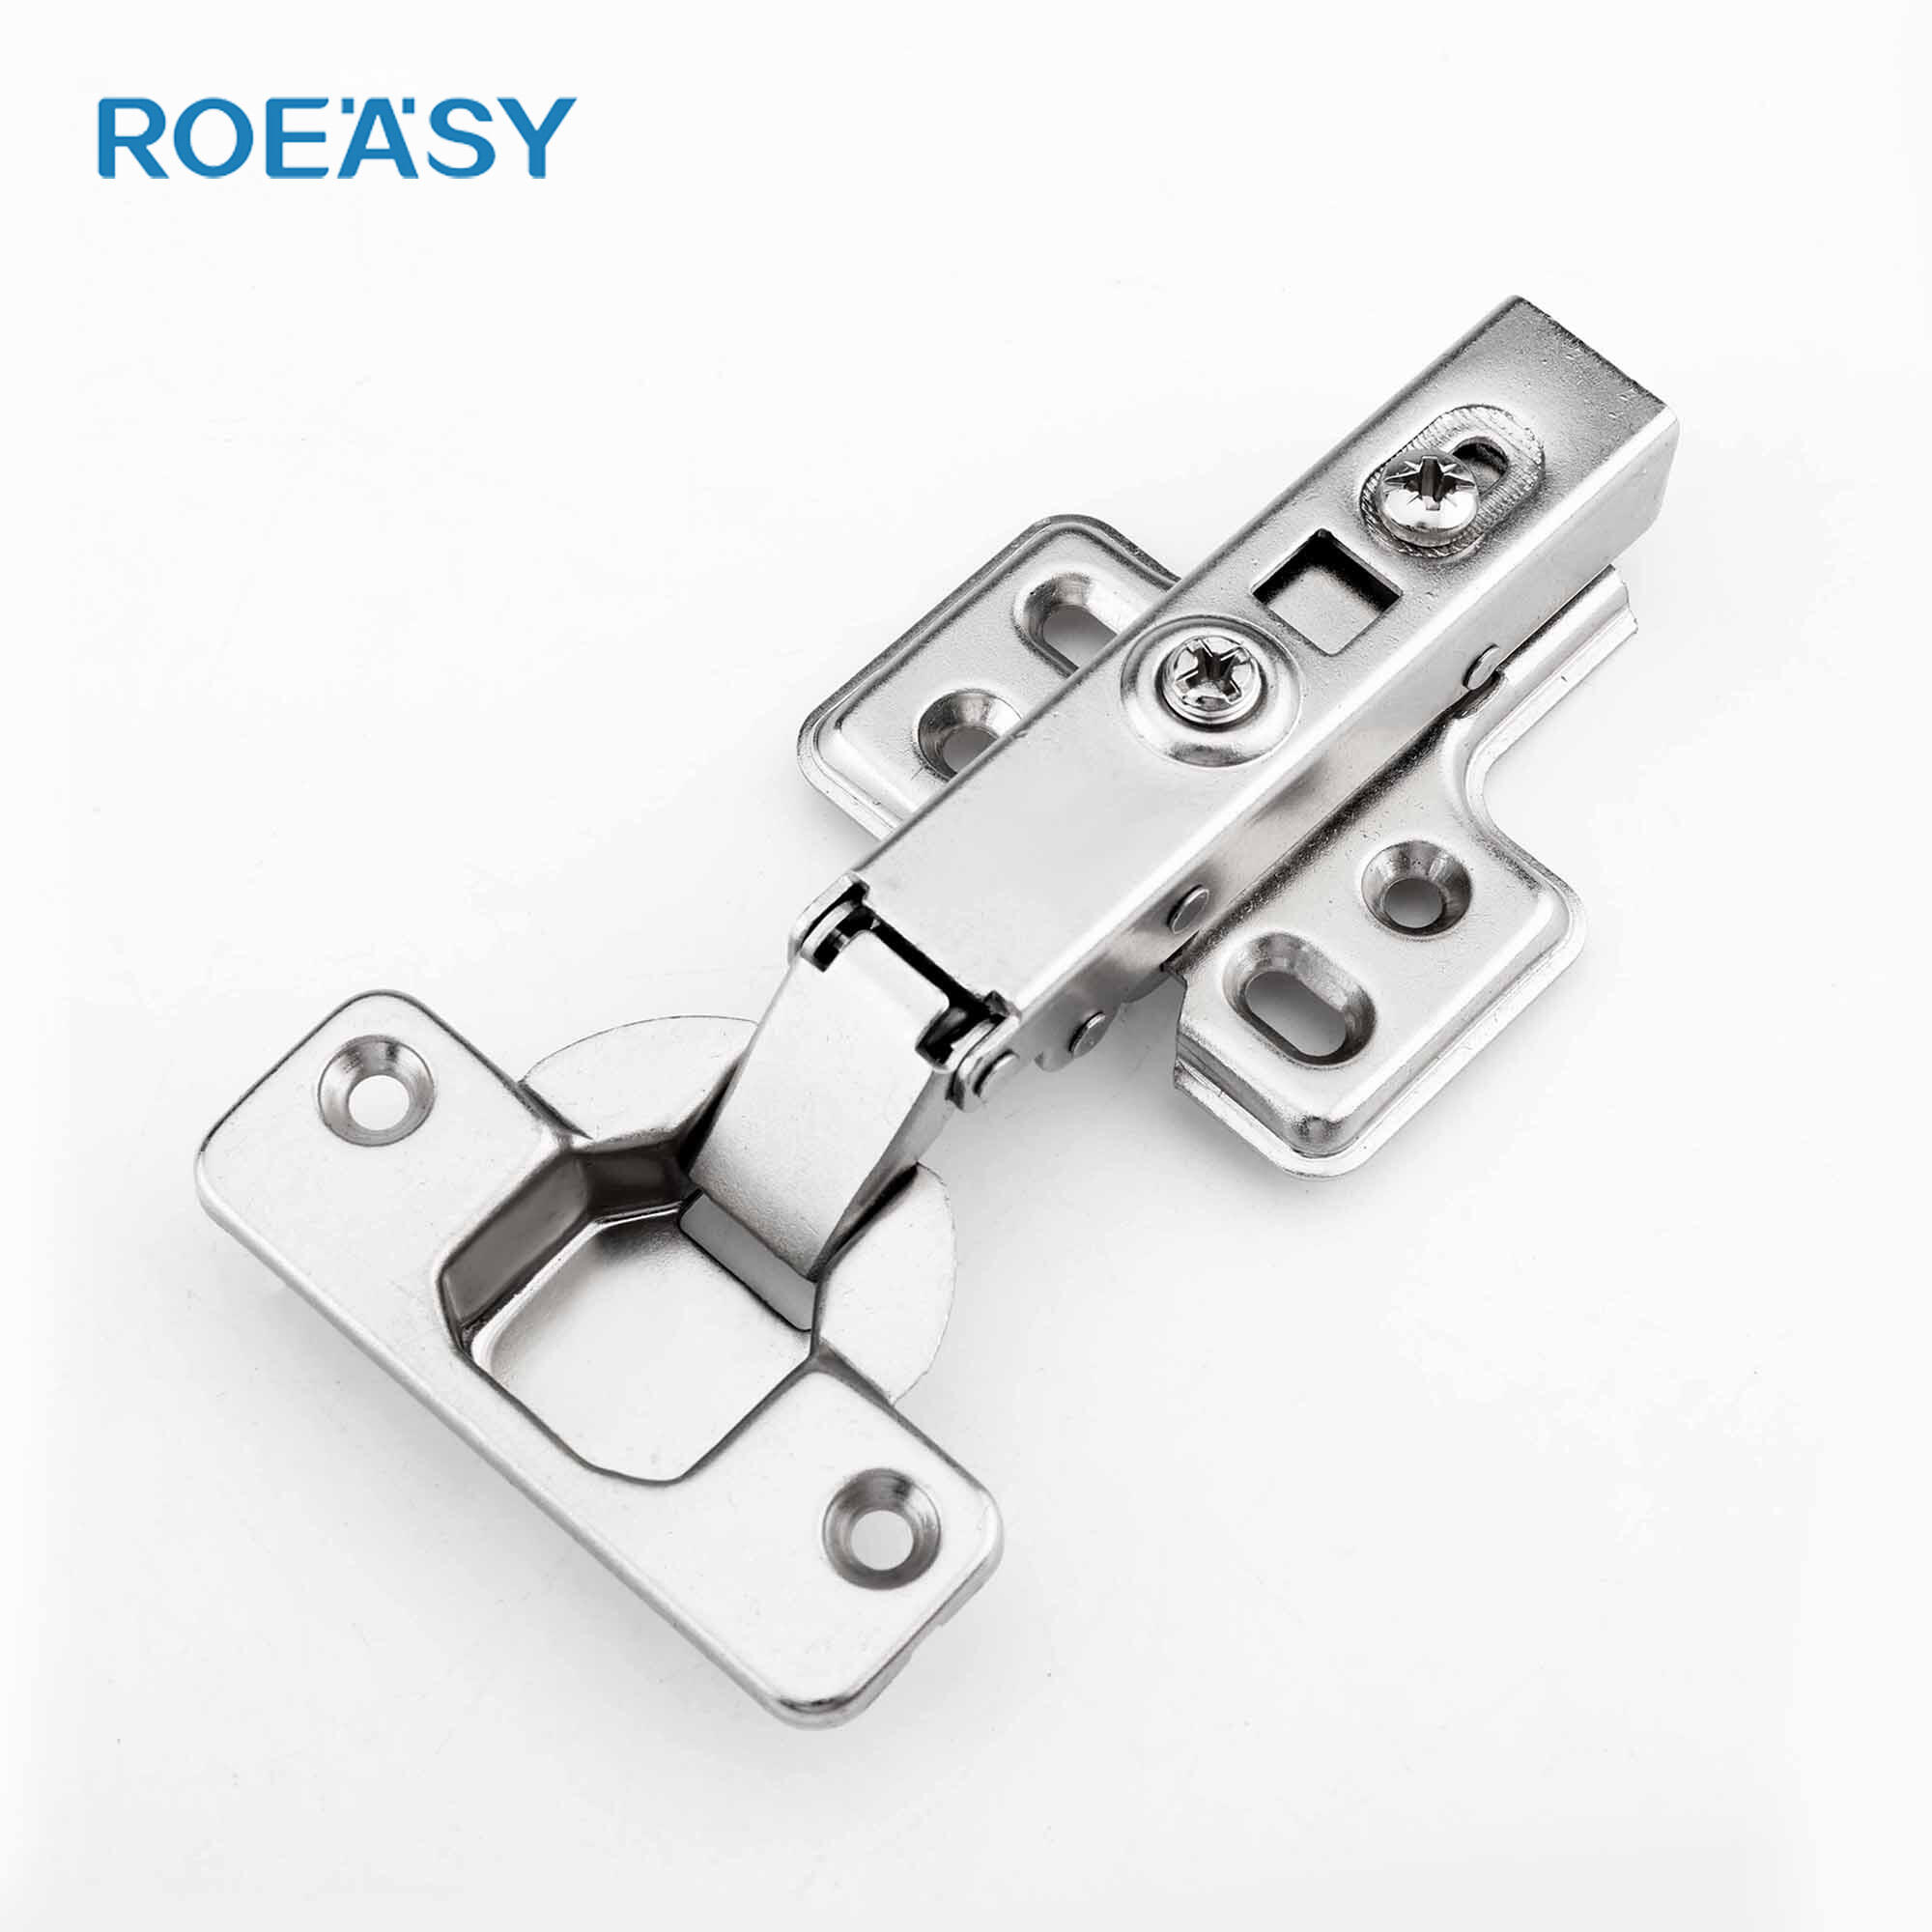 Roeasy CH-293B 35mm cup 95 degree clip-on soft close cabinet hinge